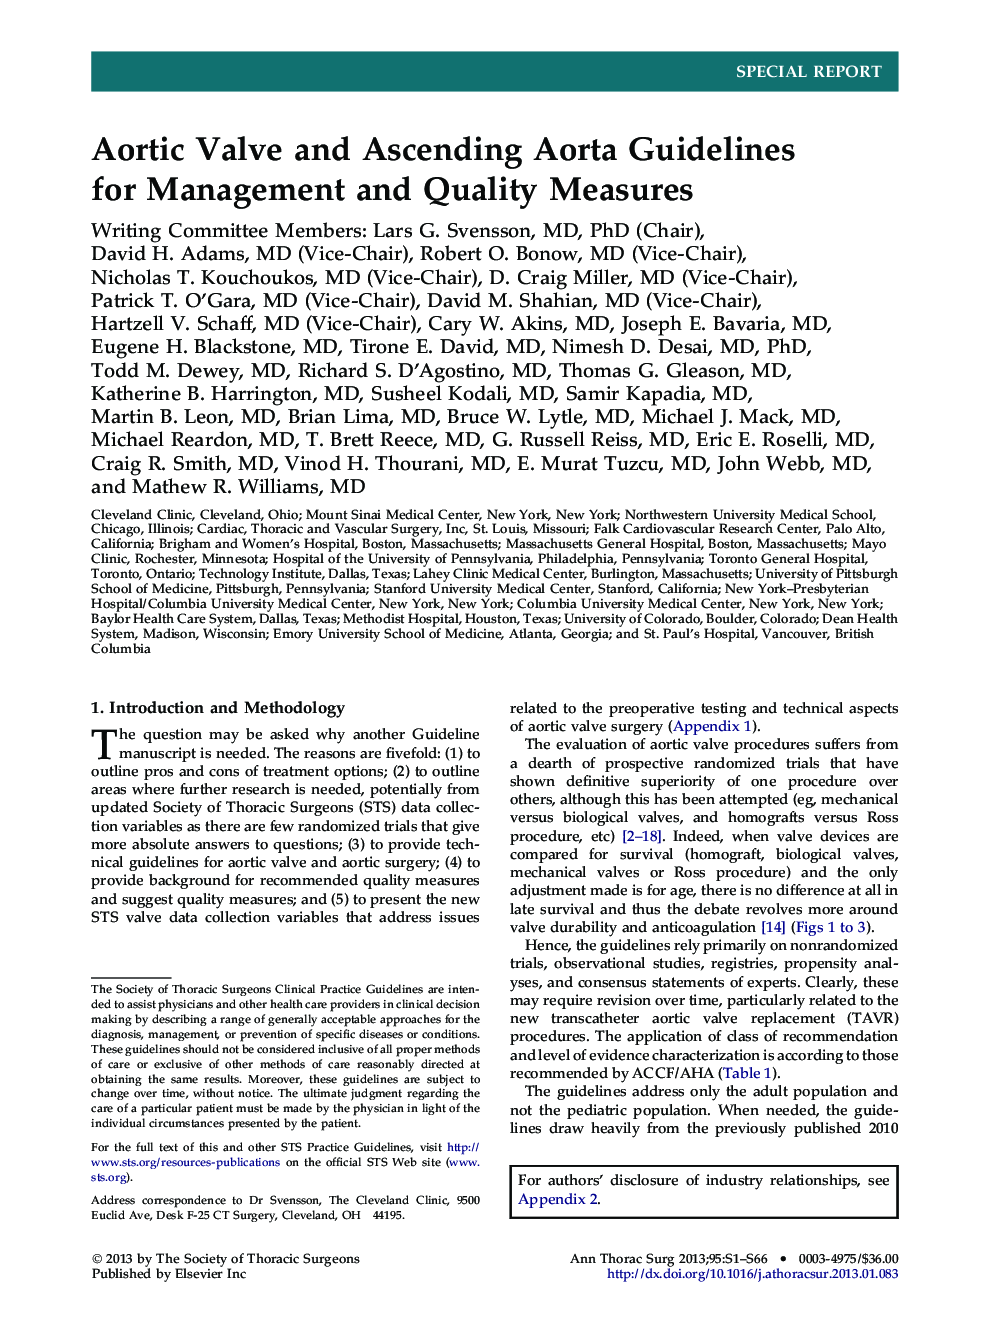 Aortic Valve and Ascending Aorta Guidelines for Management and Quality Measures